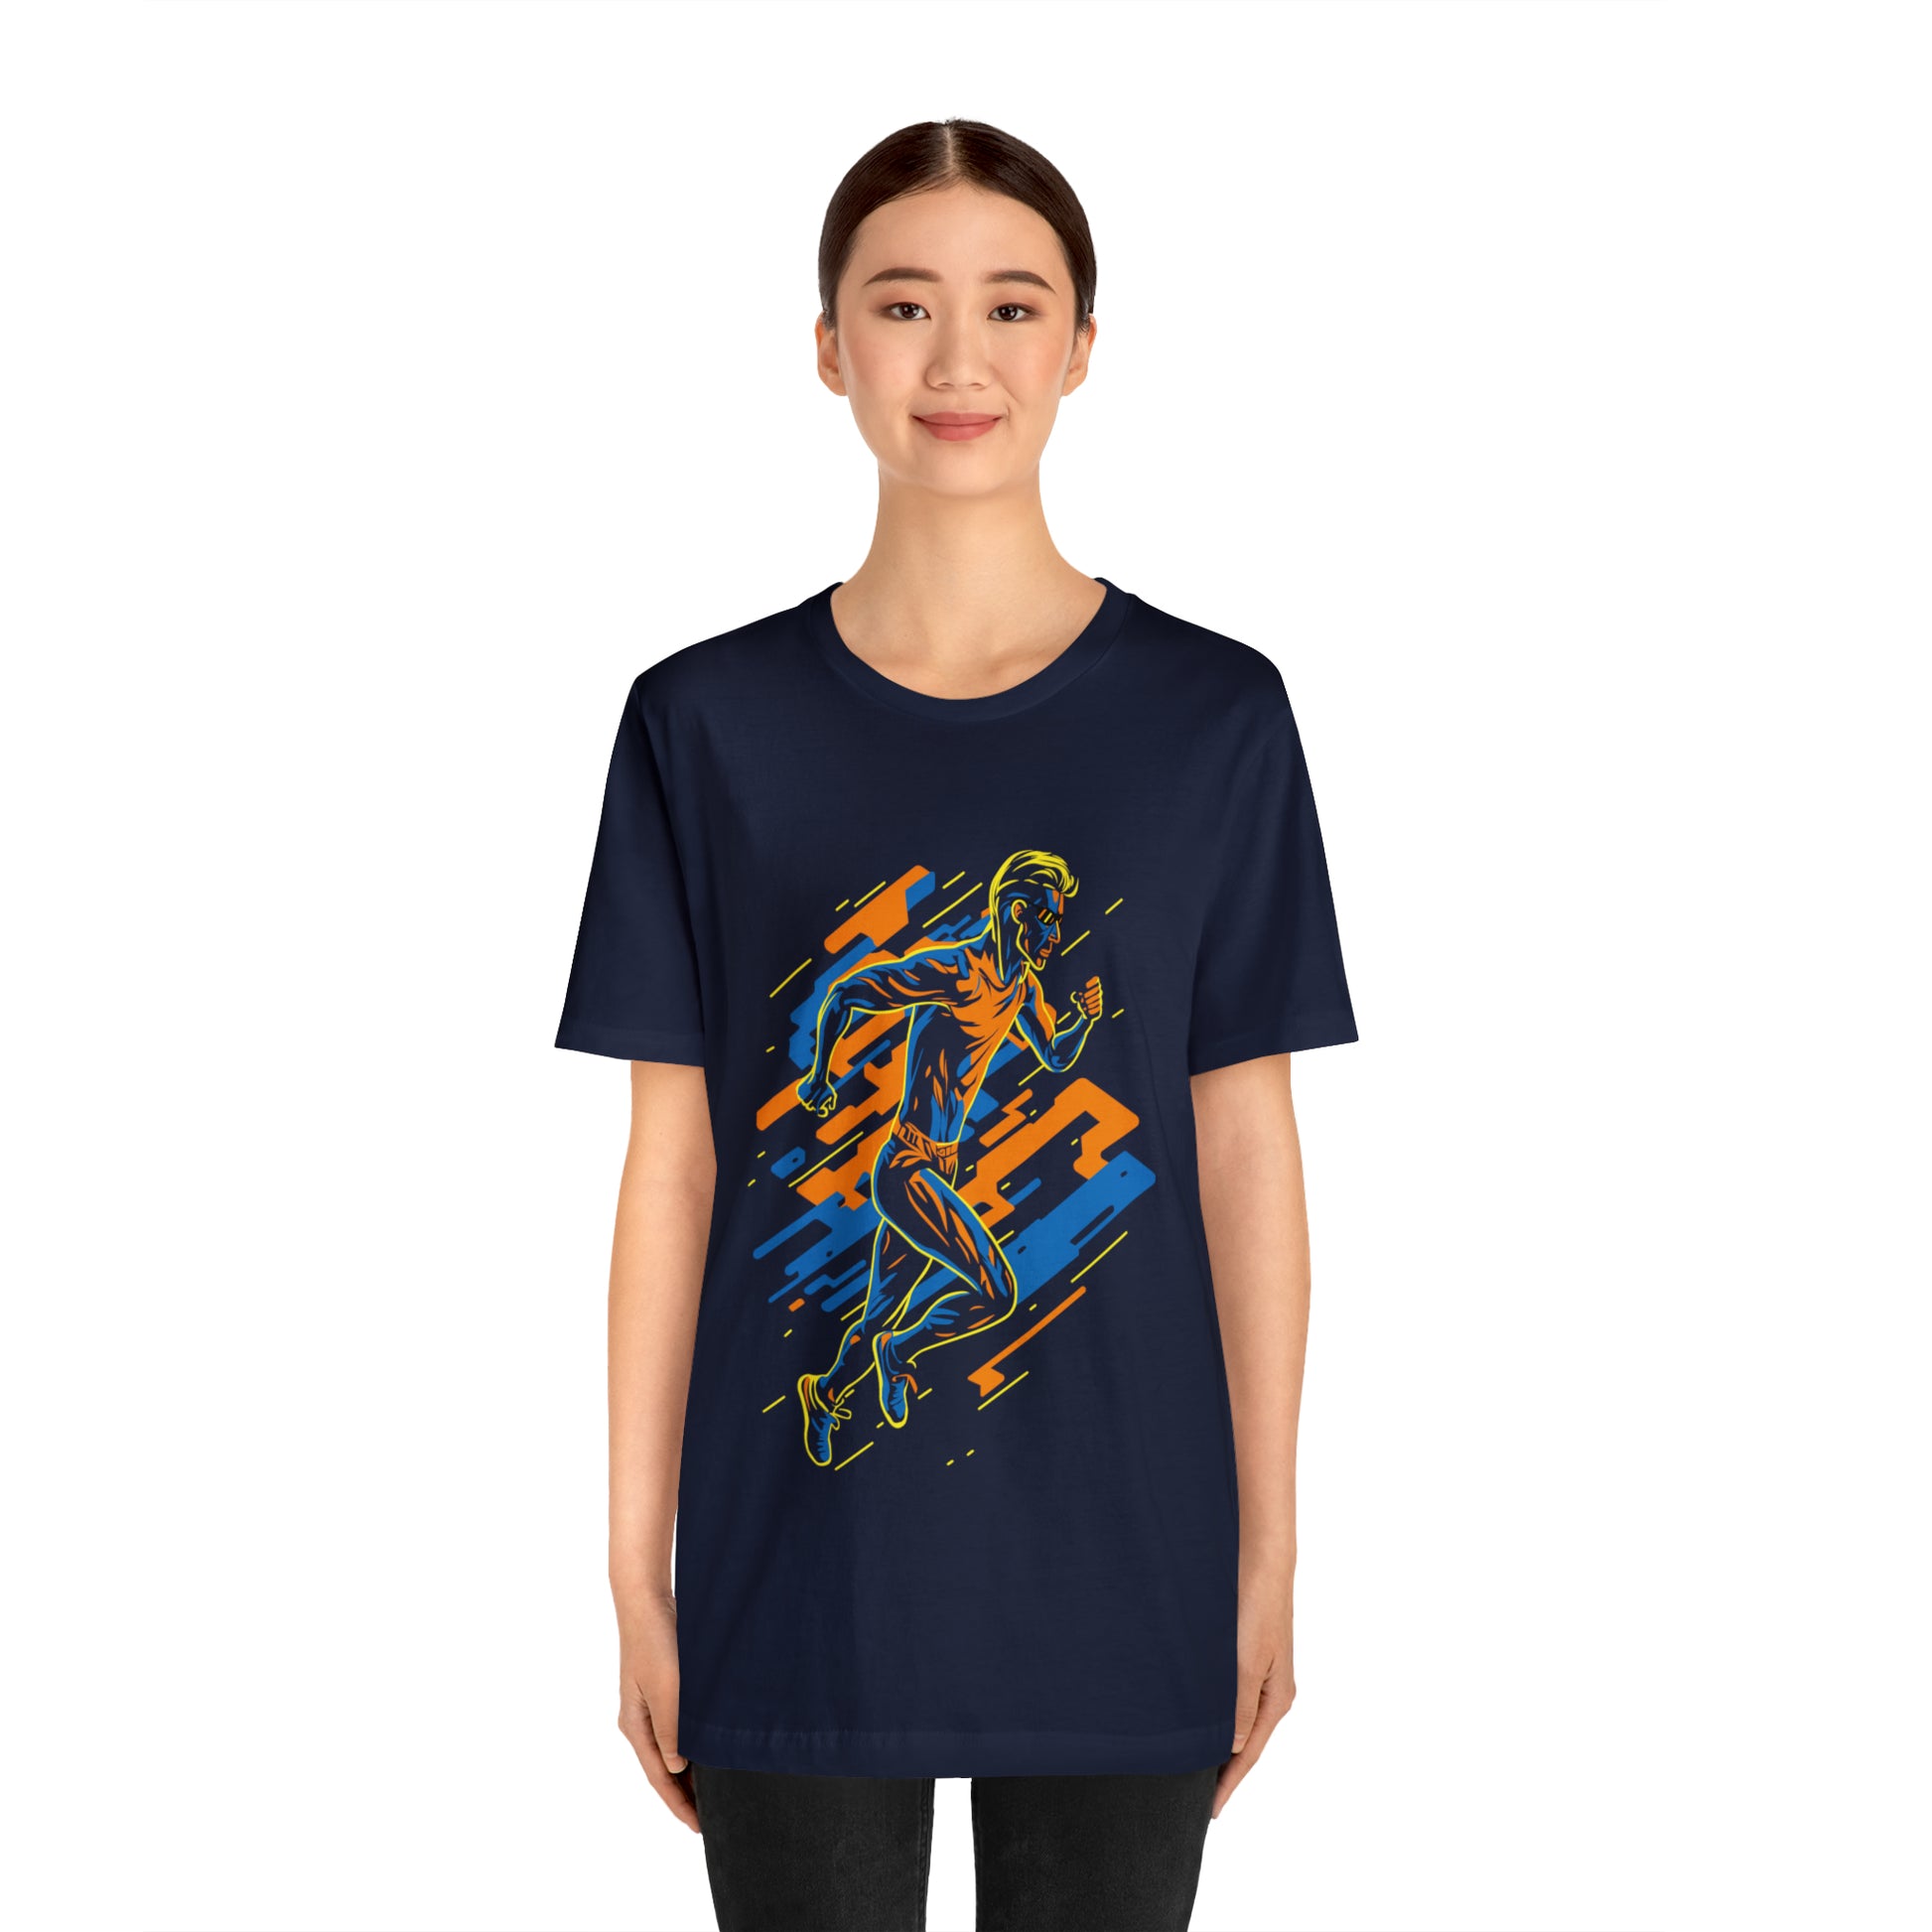 Navy T-Shirt featuring a vibrant and dynamic runner design, capturing the energy of a 'Running Man'. Taken from the TEQNEON Radioactive collection